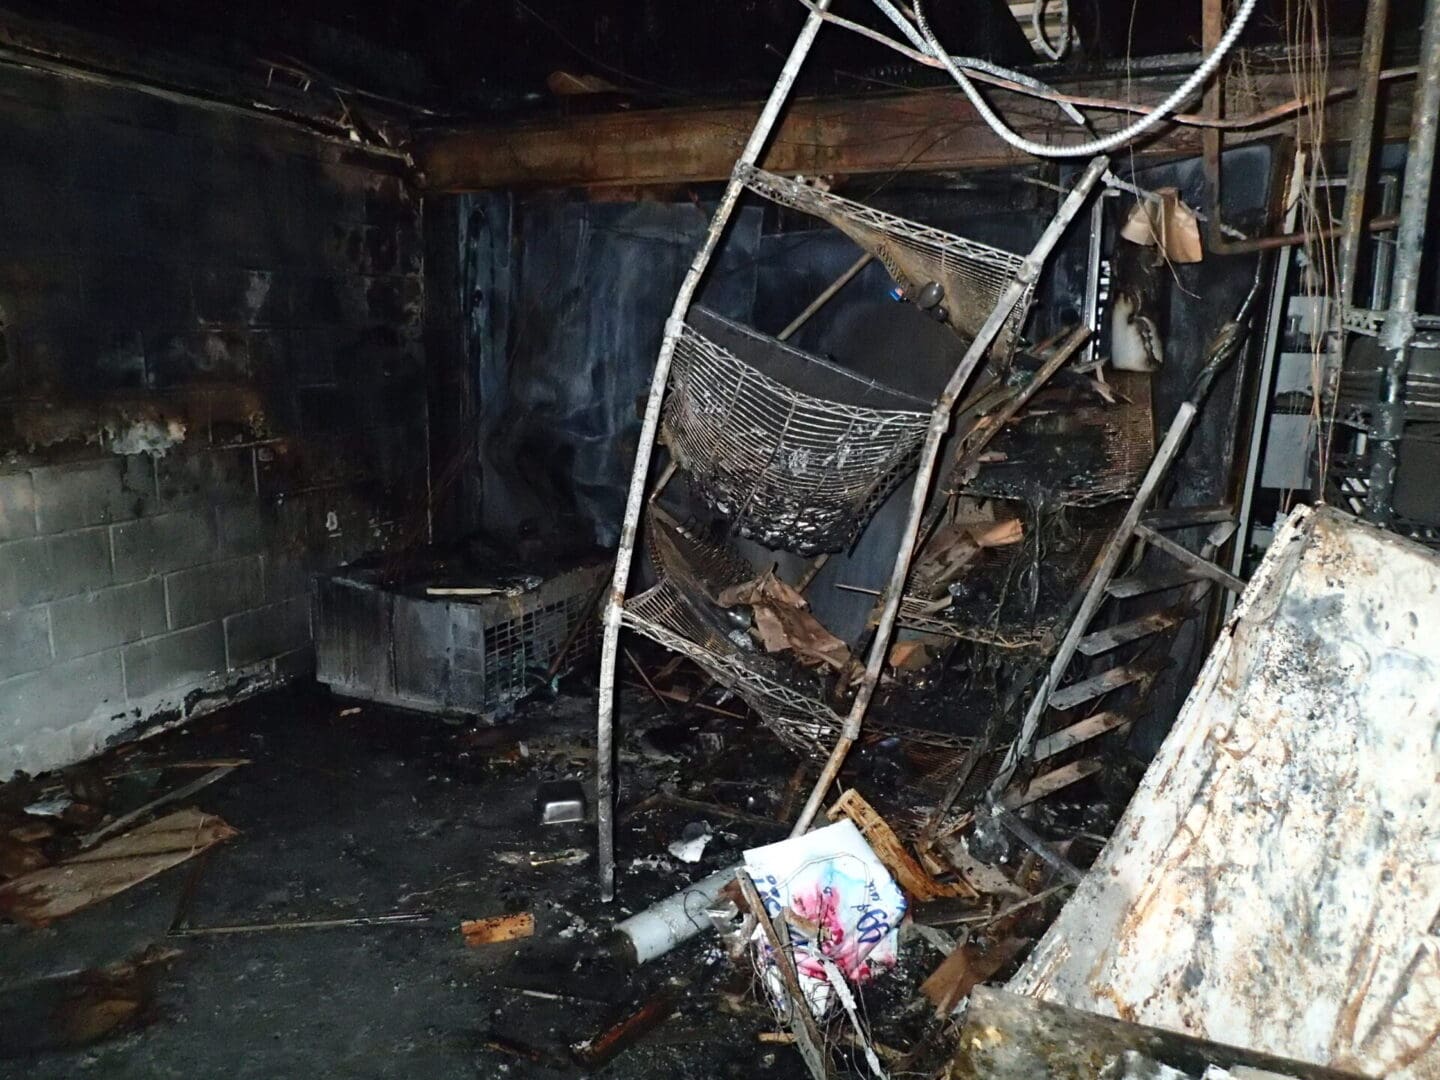 A room that has been burned and is in the middle of it.